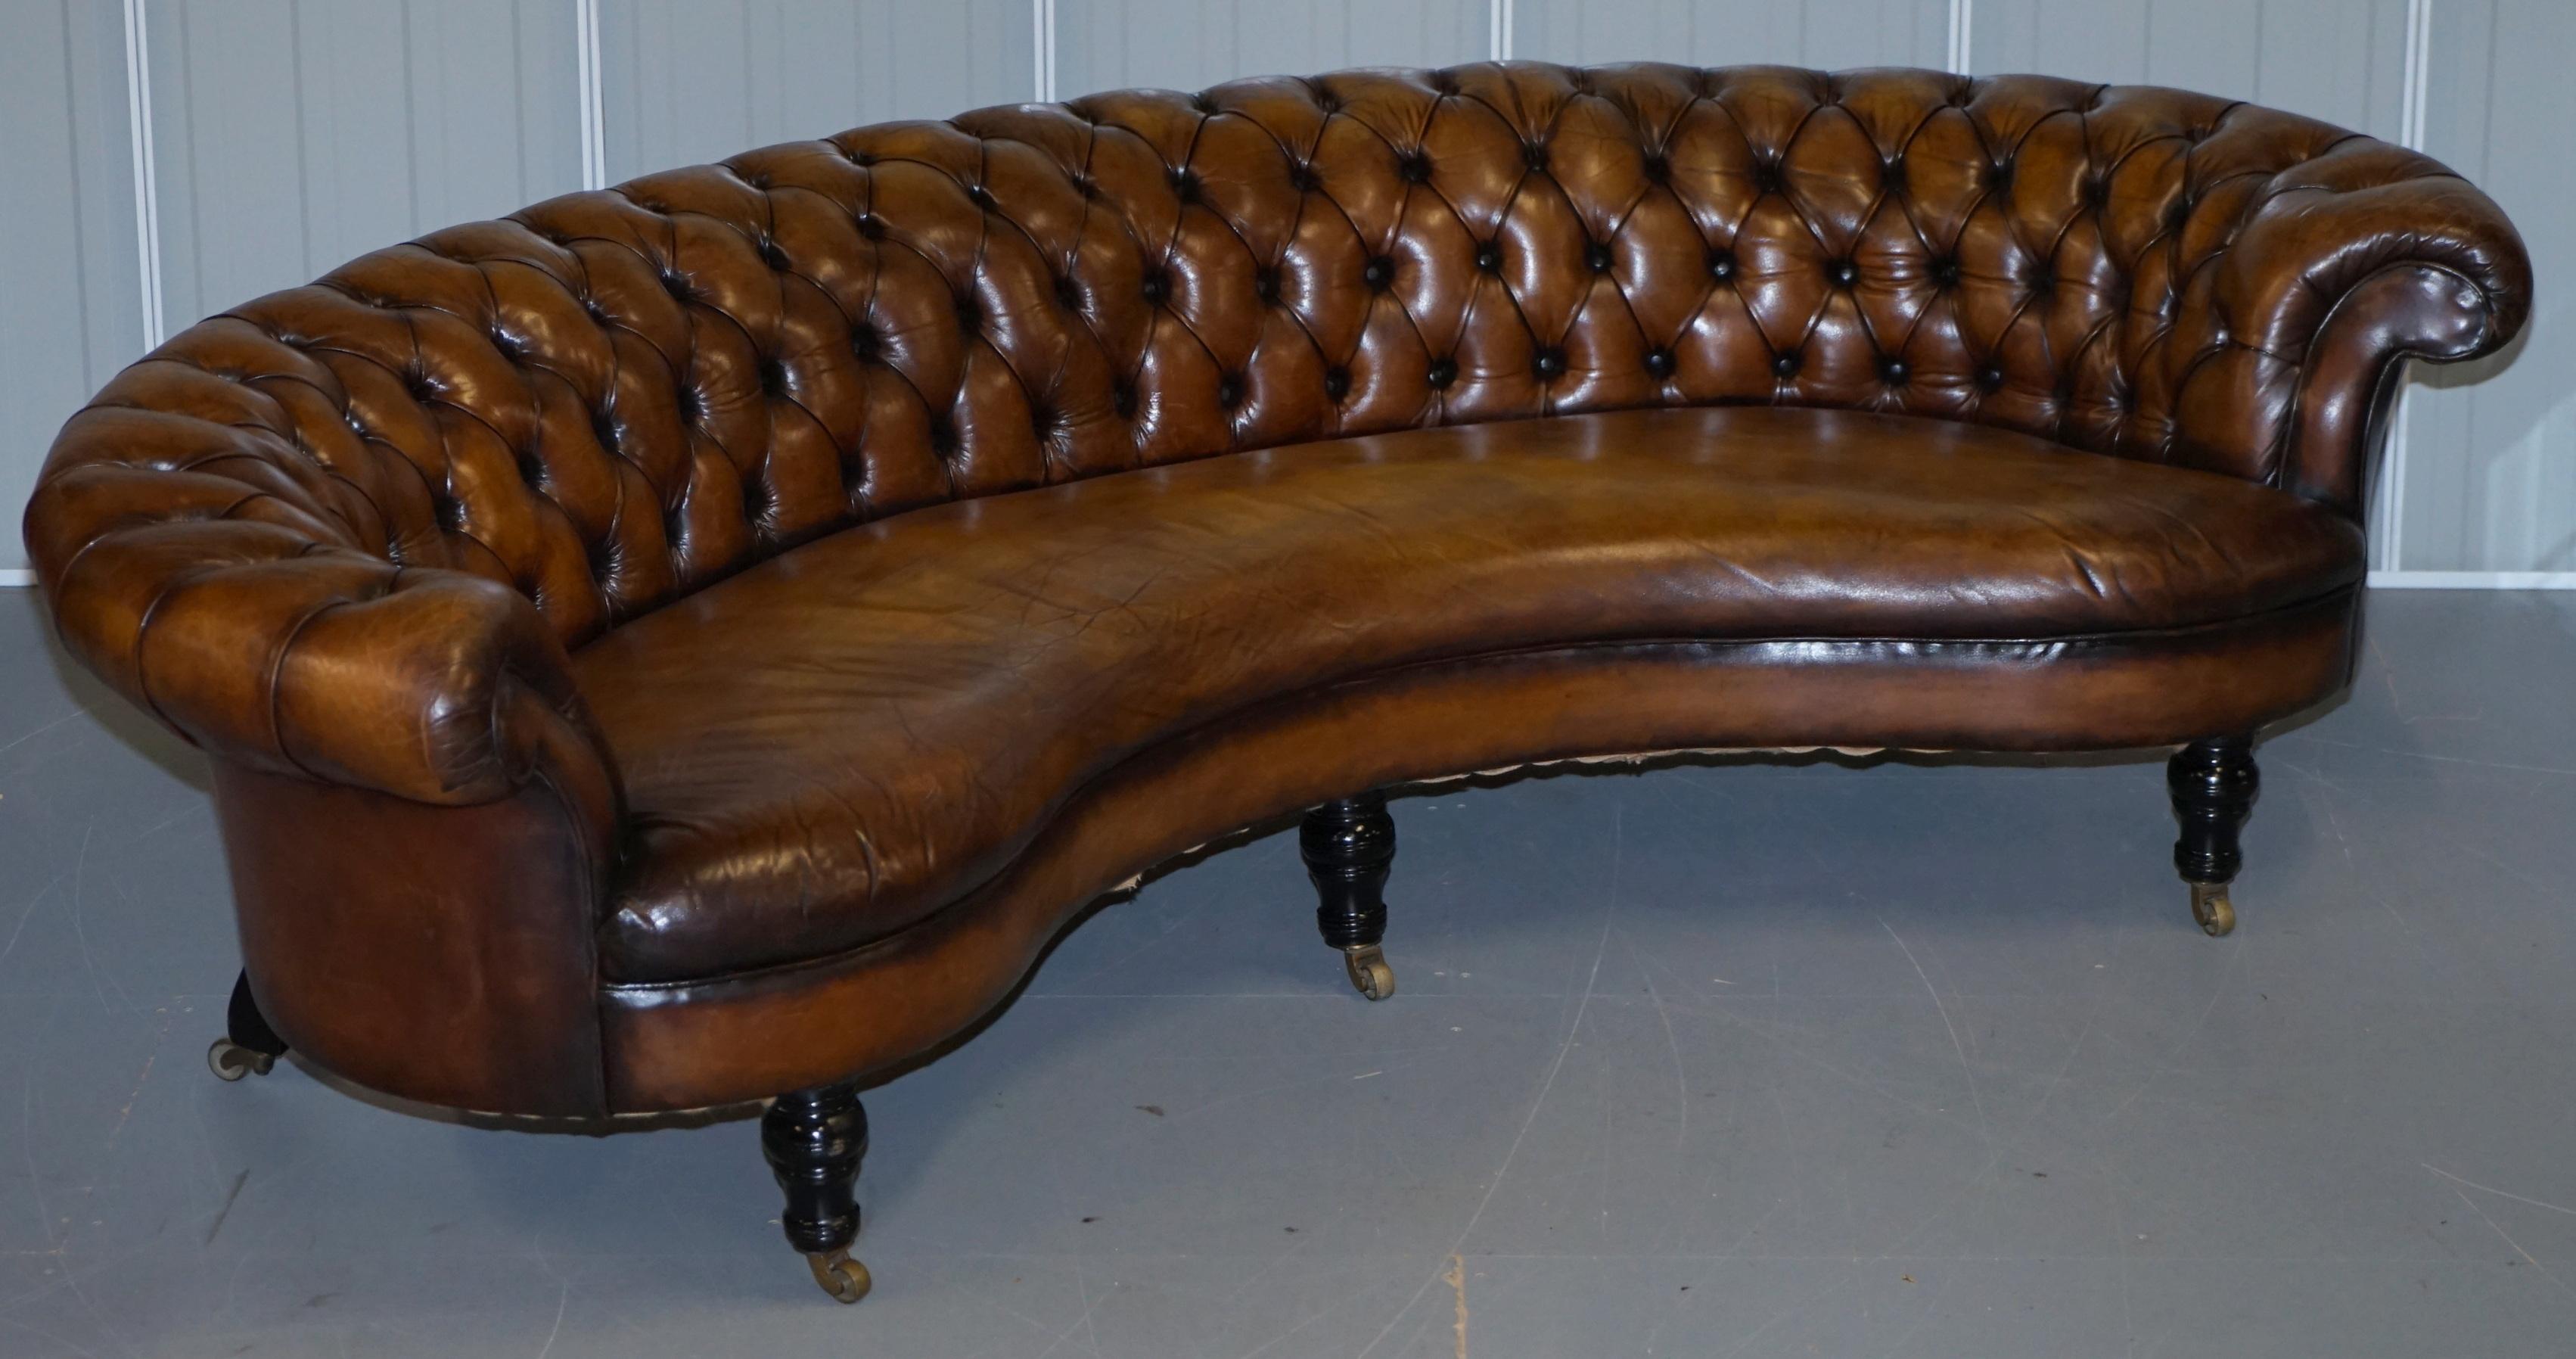 We are delighted to offer for sale this stunning exceptionally rare original fully restored Victorian walnut framed Howard & Son’s Berners Street sofa with leather upholstery 

This sofa is exceptionally rare indeed, I've only ever seen one other